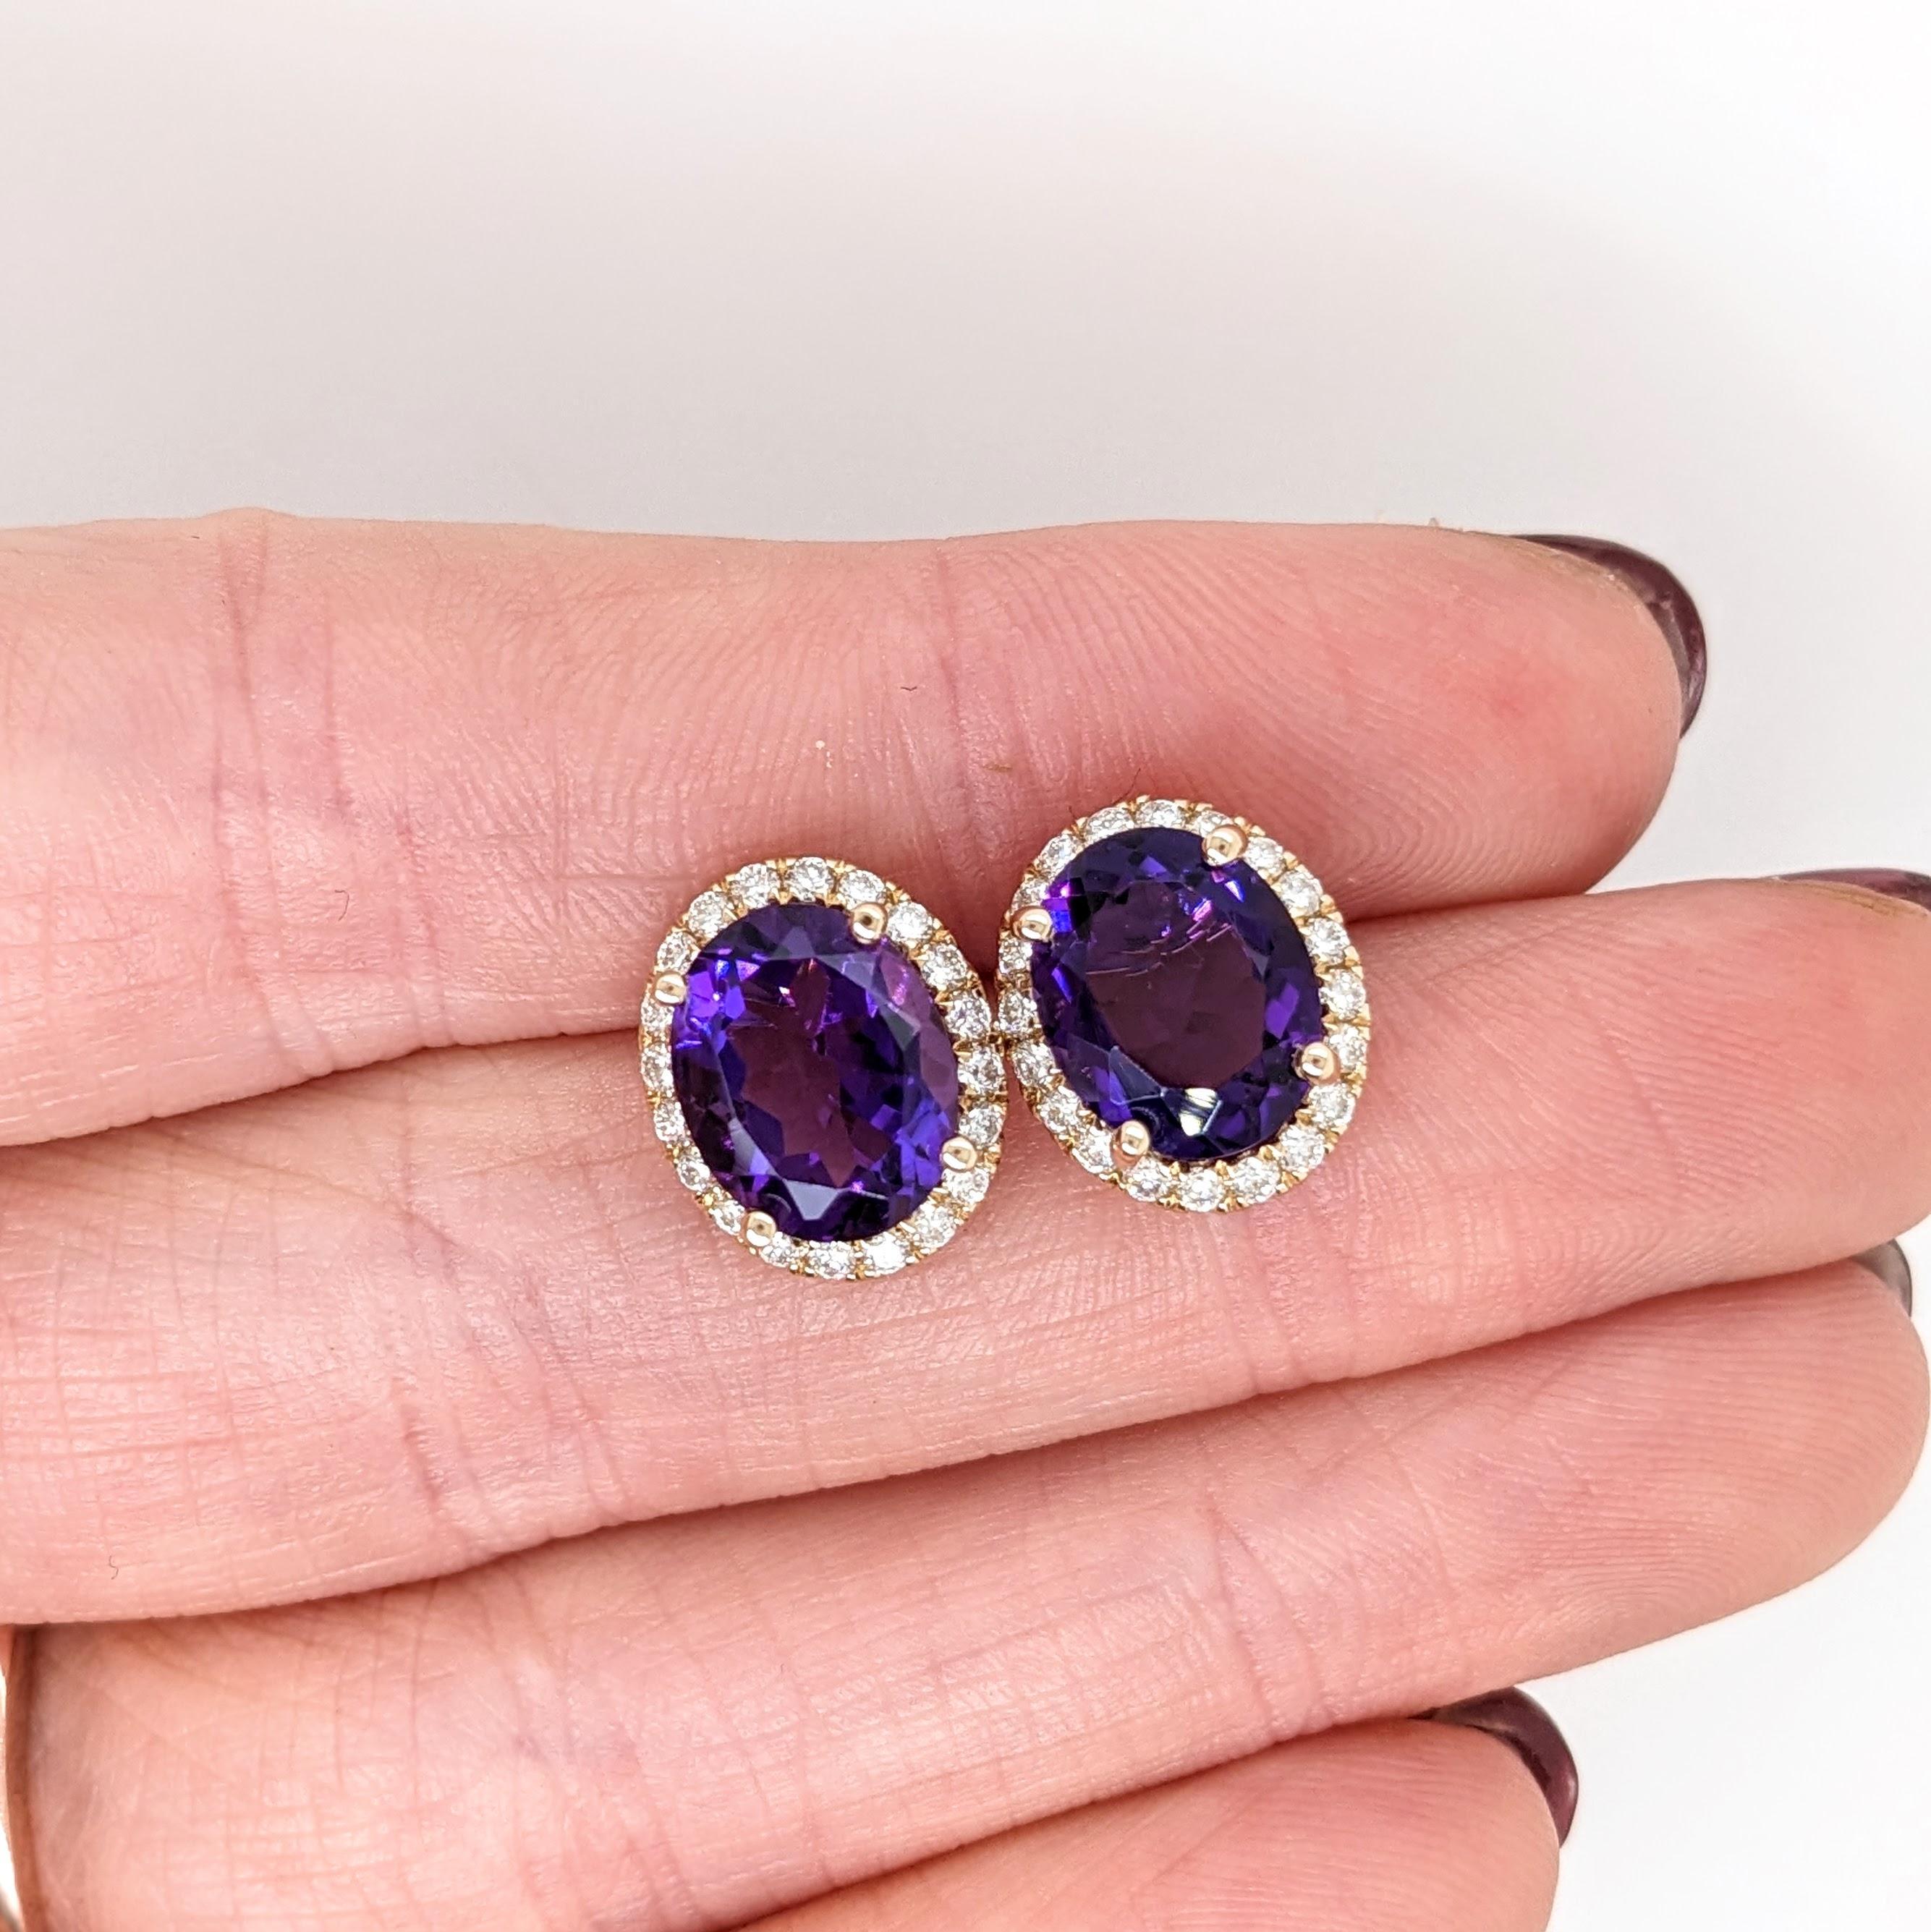 These stud earrings feature a pair of lovely purple natural, earth mined oval Amethyst in solid 14k gold with a natural diamond halo. These earrings can be a beautiful february birthstone gift for your loved ones! 

Specifications

Item Type: